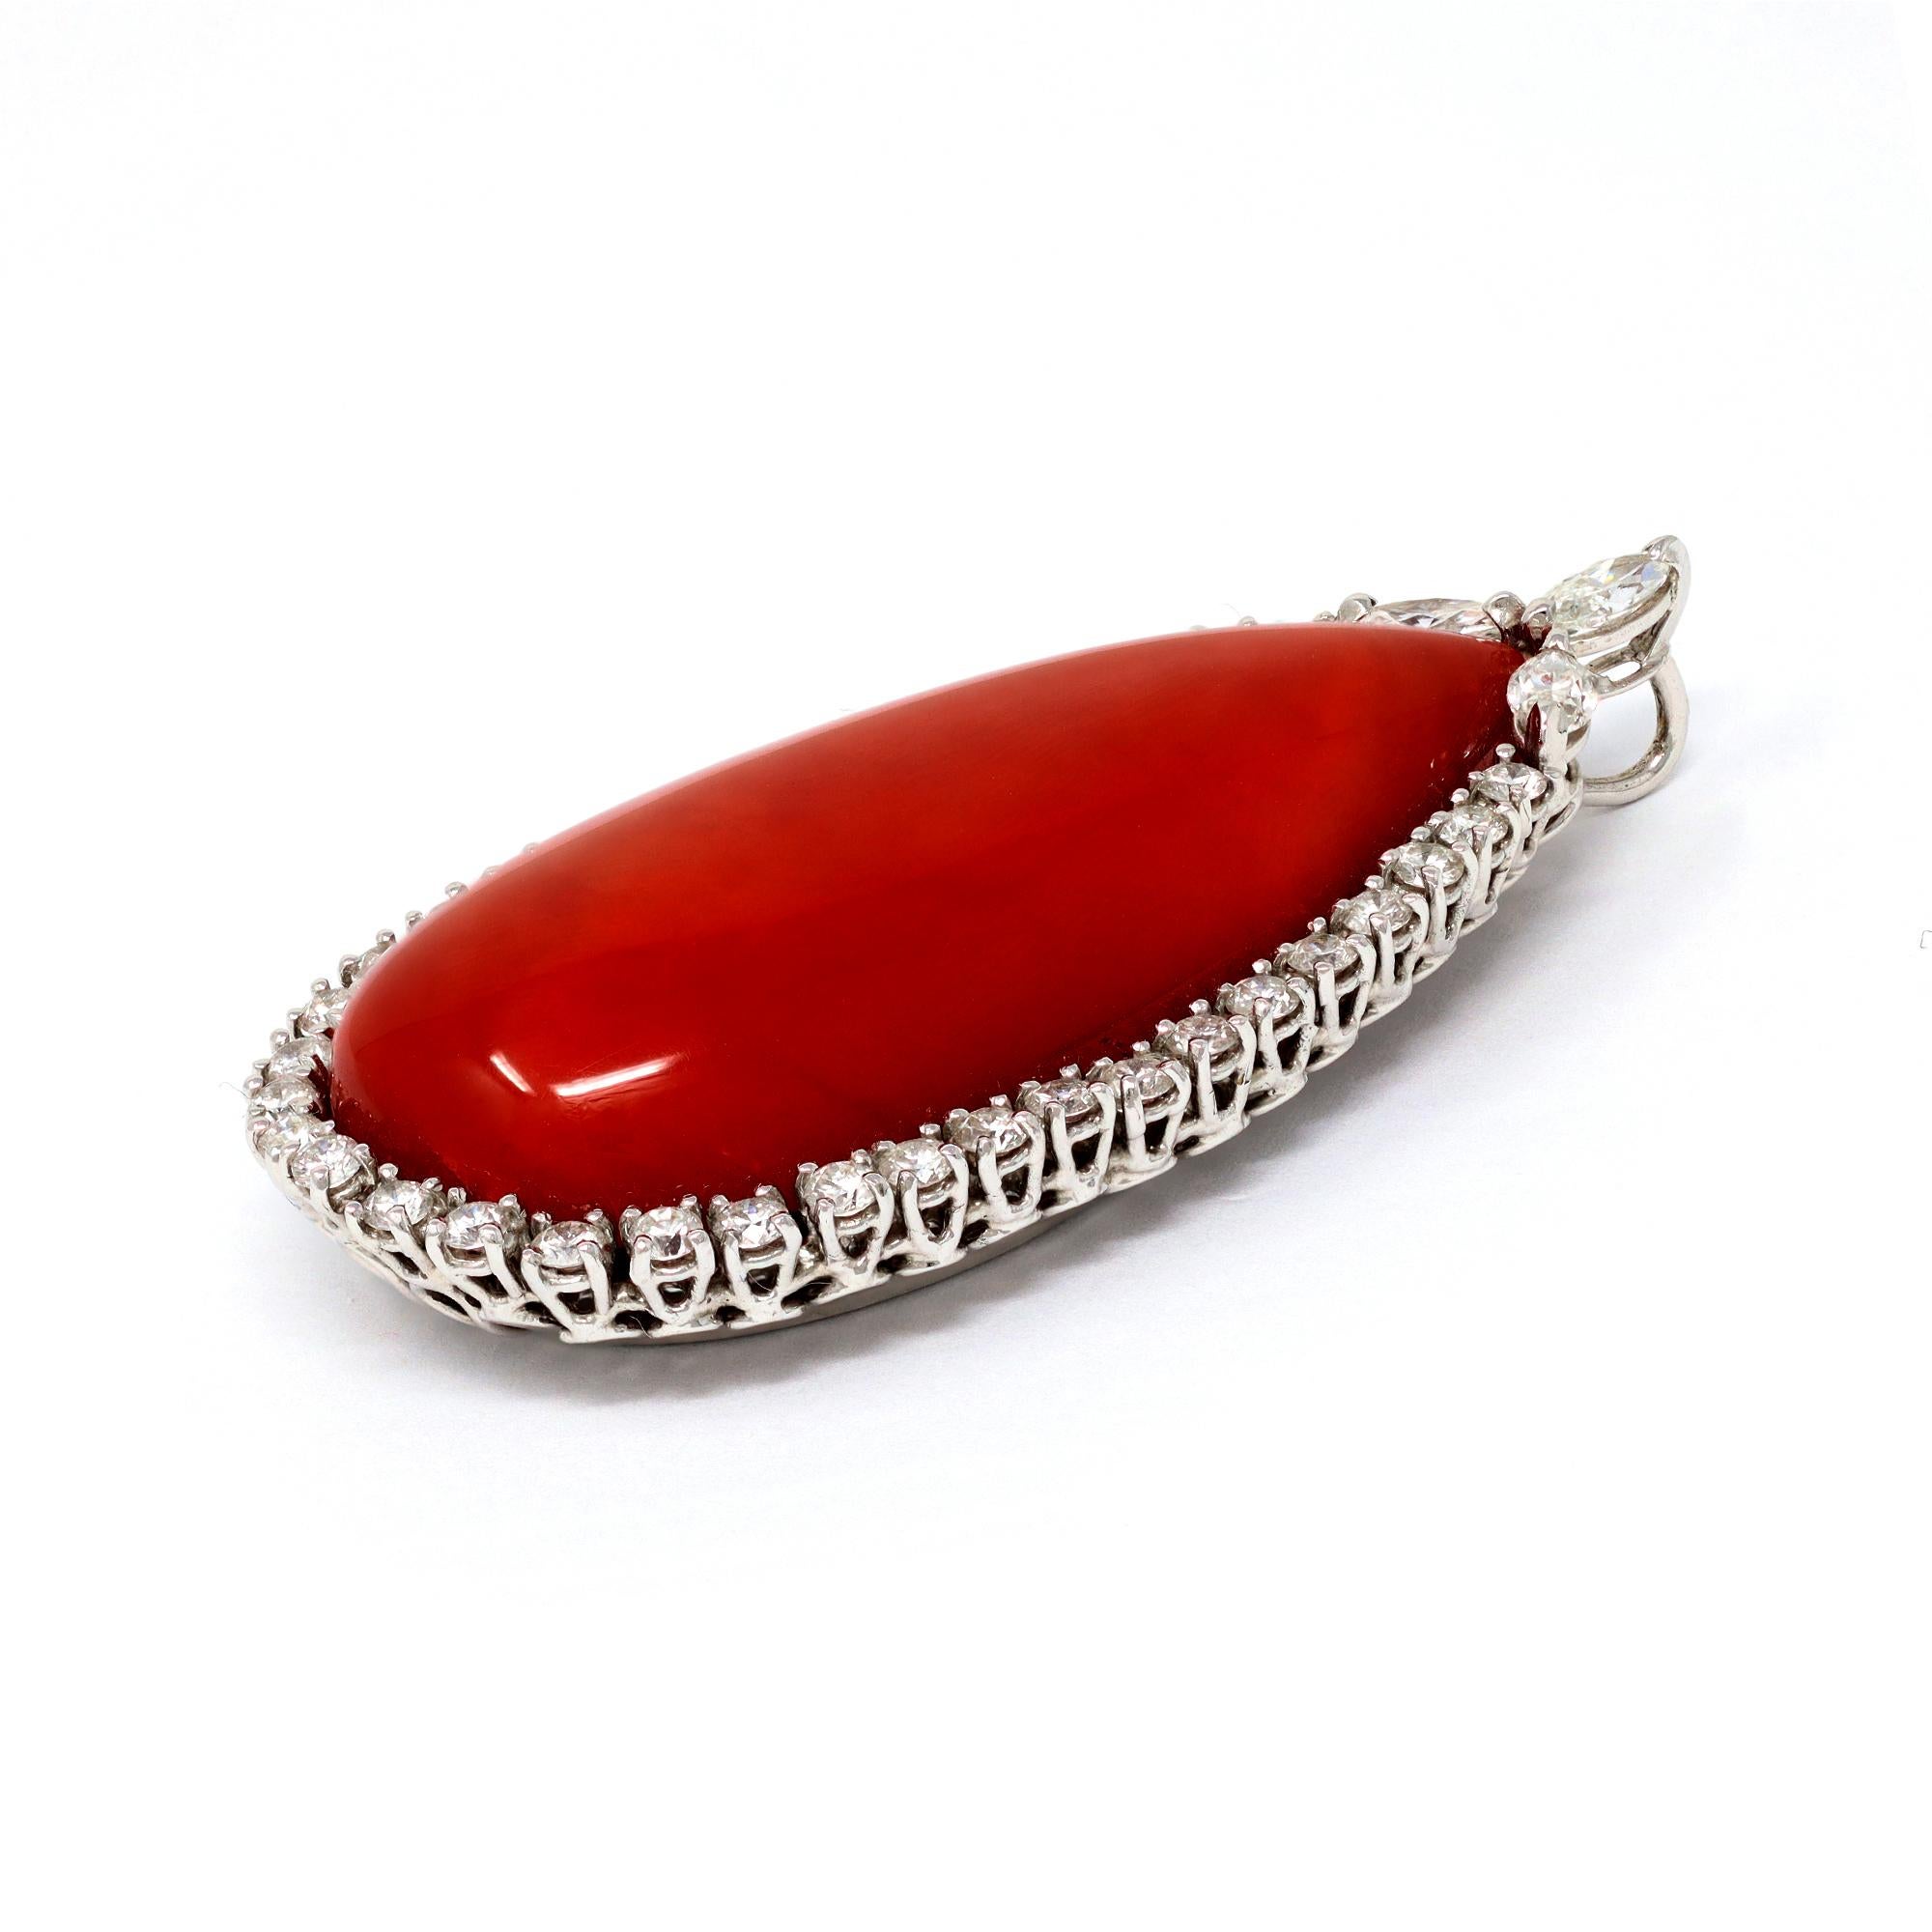 A natural untreated deep red coral and diamonds pendant circa 1970. The 18 karat white gold pendant features an important and large  drop shape red coral surrounded by a halo of diamonds and set with 3 marquise shape diamonds at the top. The